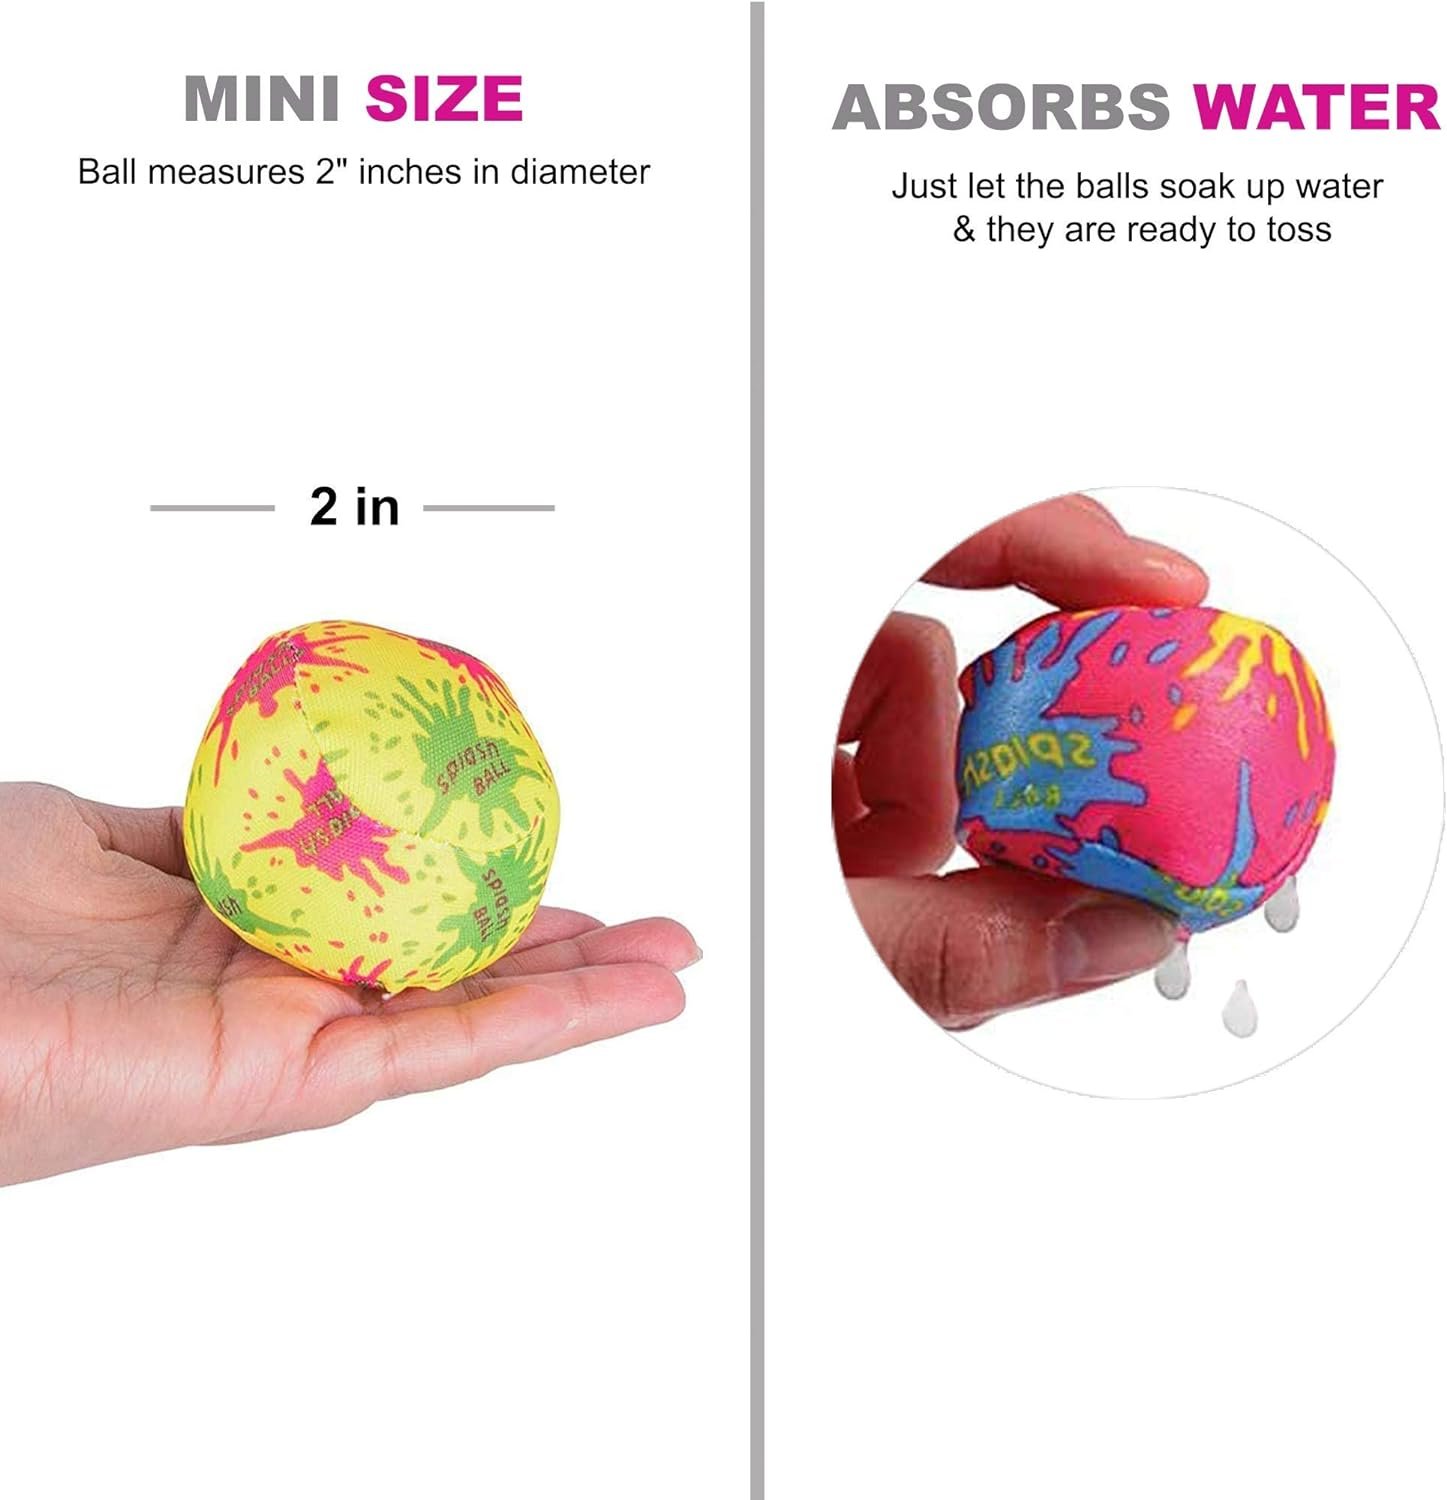 4Es Novelty 24 Pack - 2 Water Bomb Splash Balls - Mini Water Absorbent Ball - Kids Pool Toys, Outdoor Water Activities for Kids, Pool Beach Party Favors. Water Fight Games